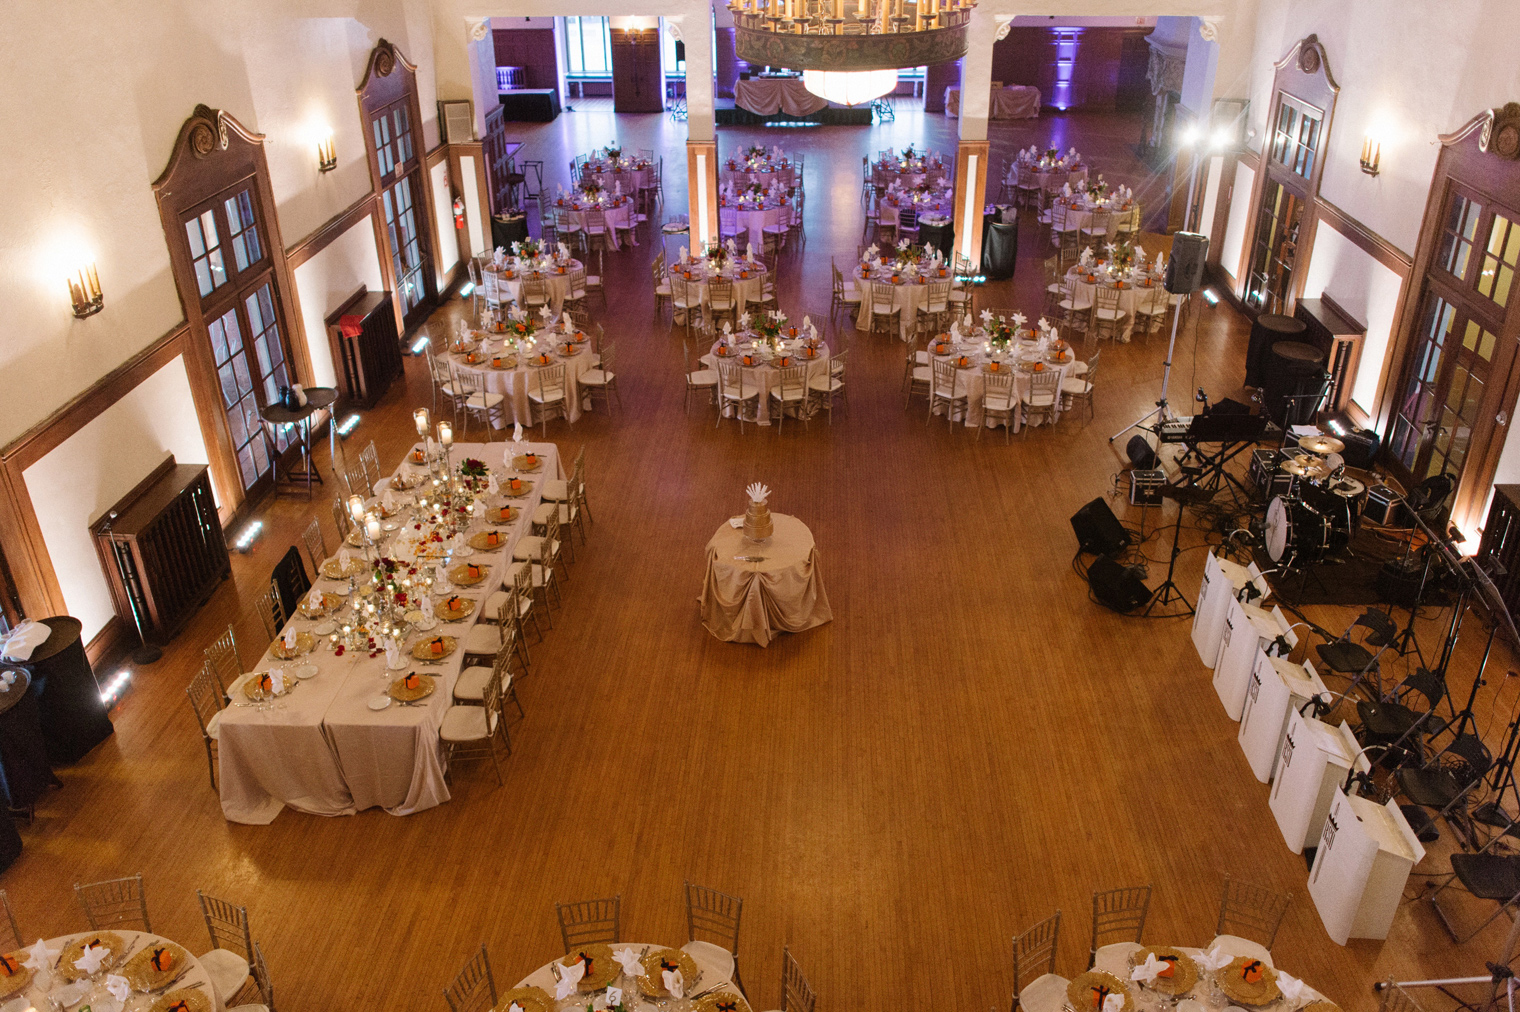 The ballroom at the Detroit Yacht Club ready for a black tie wedding.